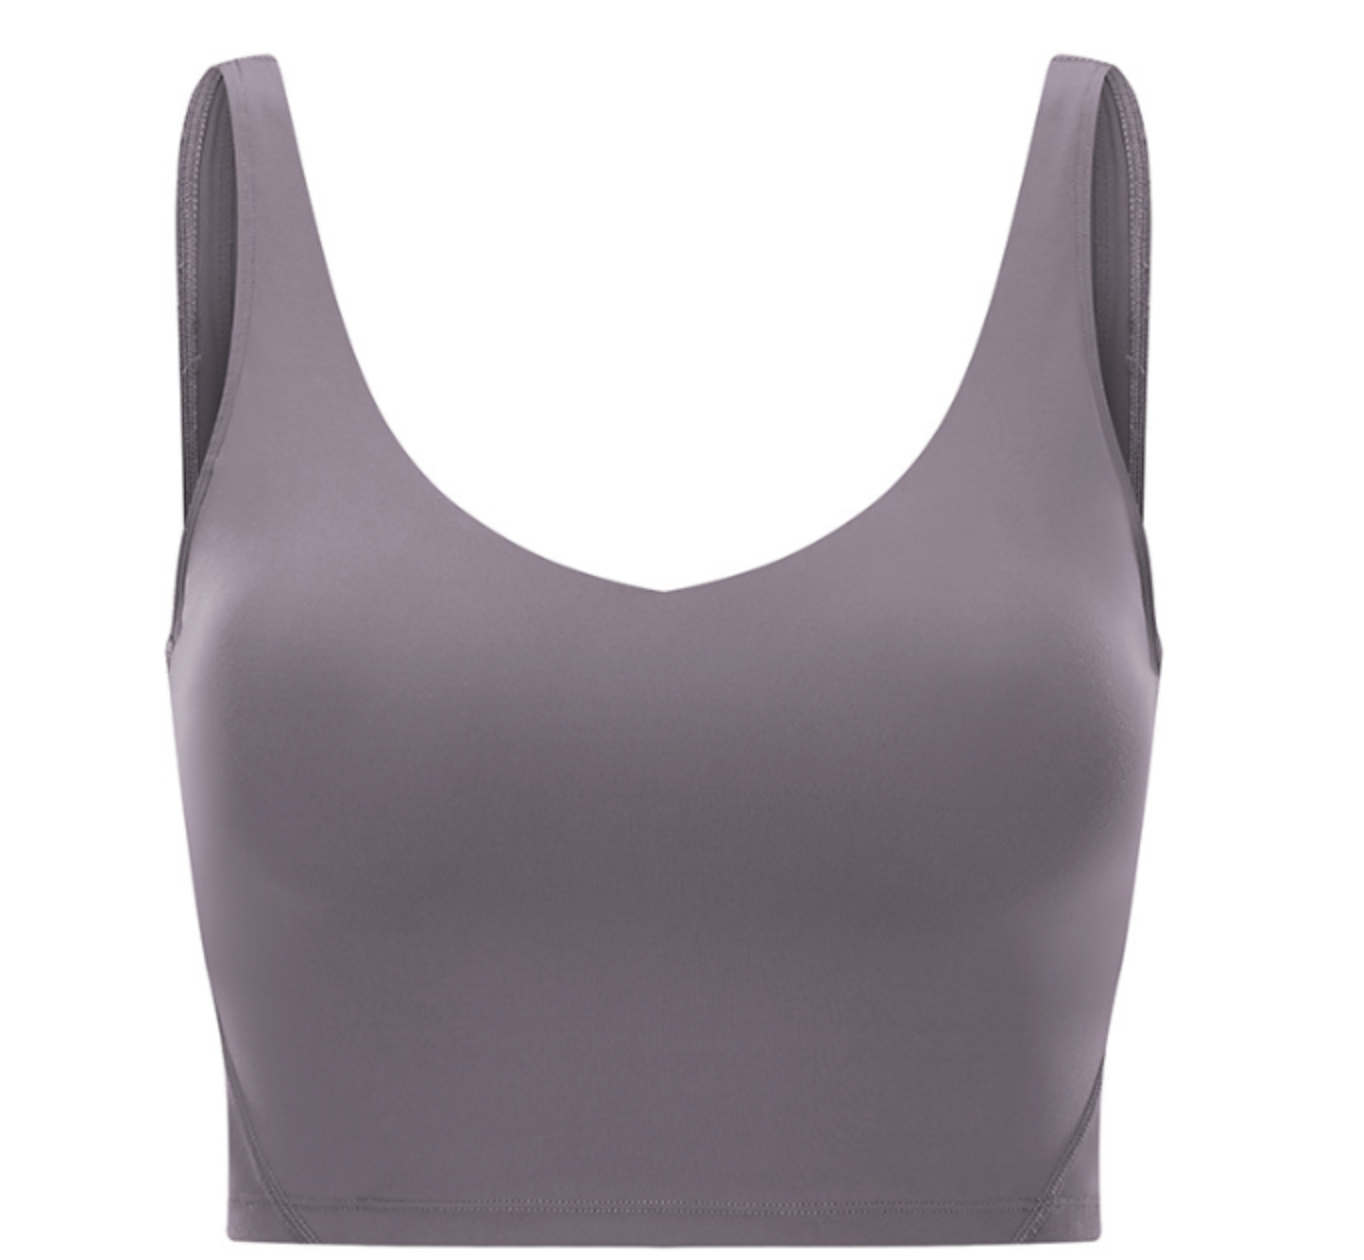 Align tank cleavage. I'm a size 2 or 4 in tops but bras are 6 or 8